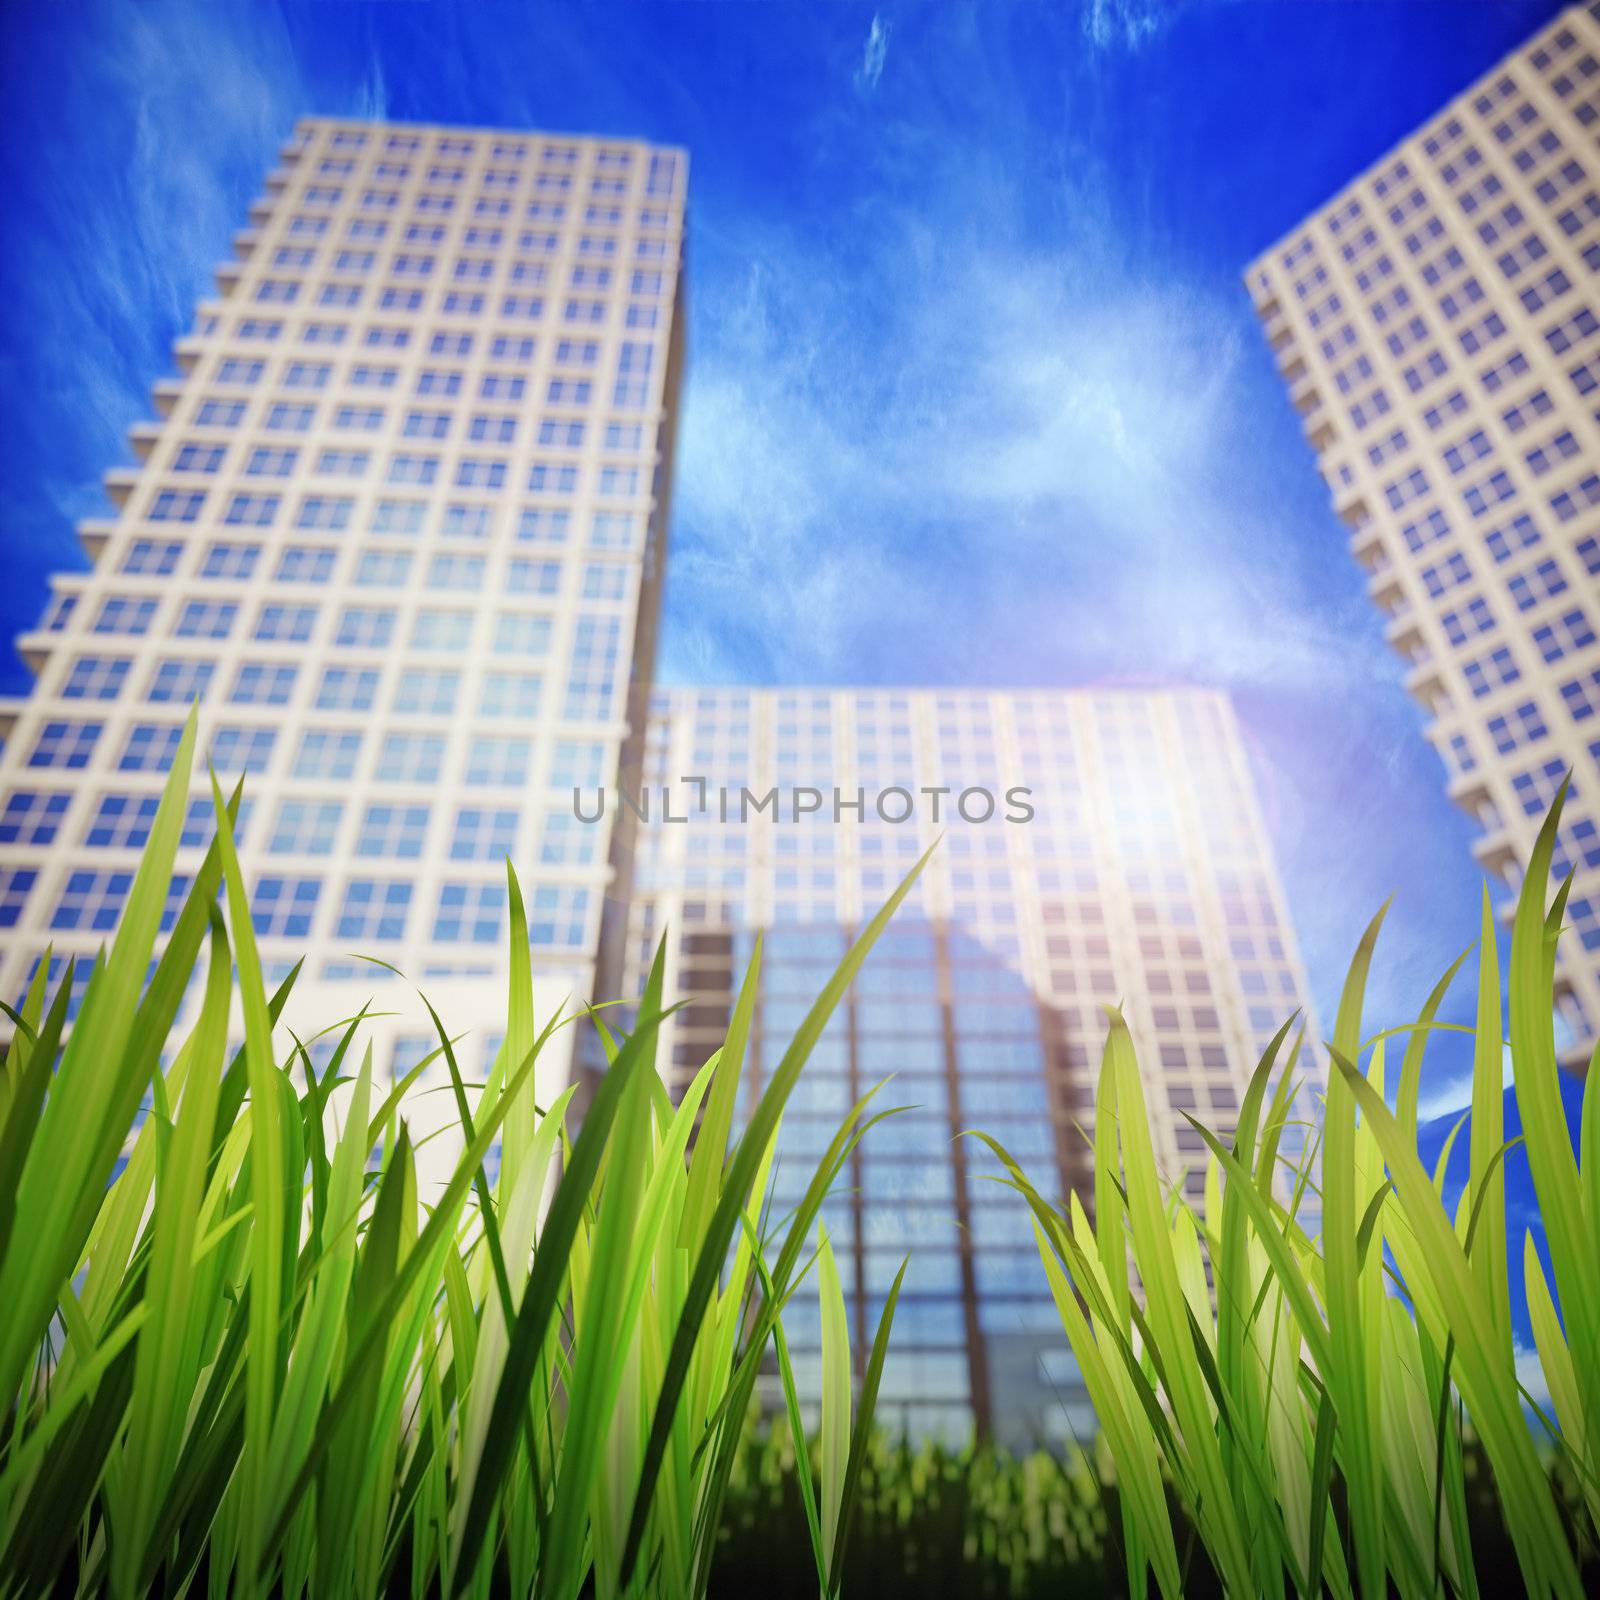 green grass and skyscrapers, aspiring to the sky in the background. Shallow DOF